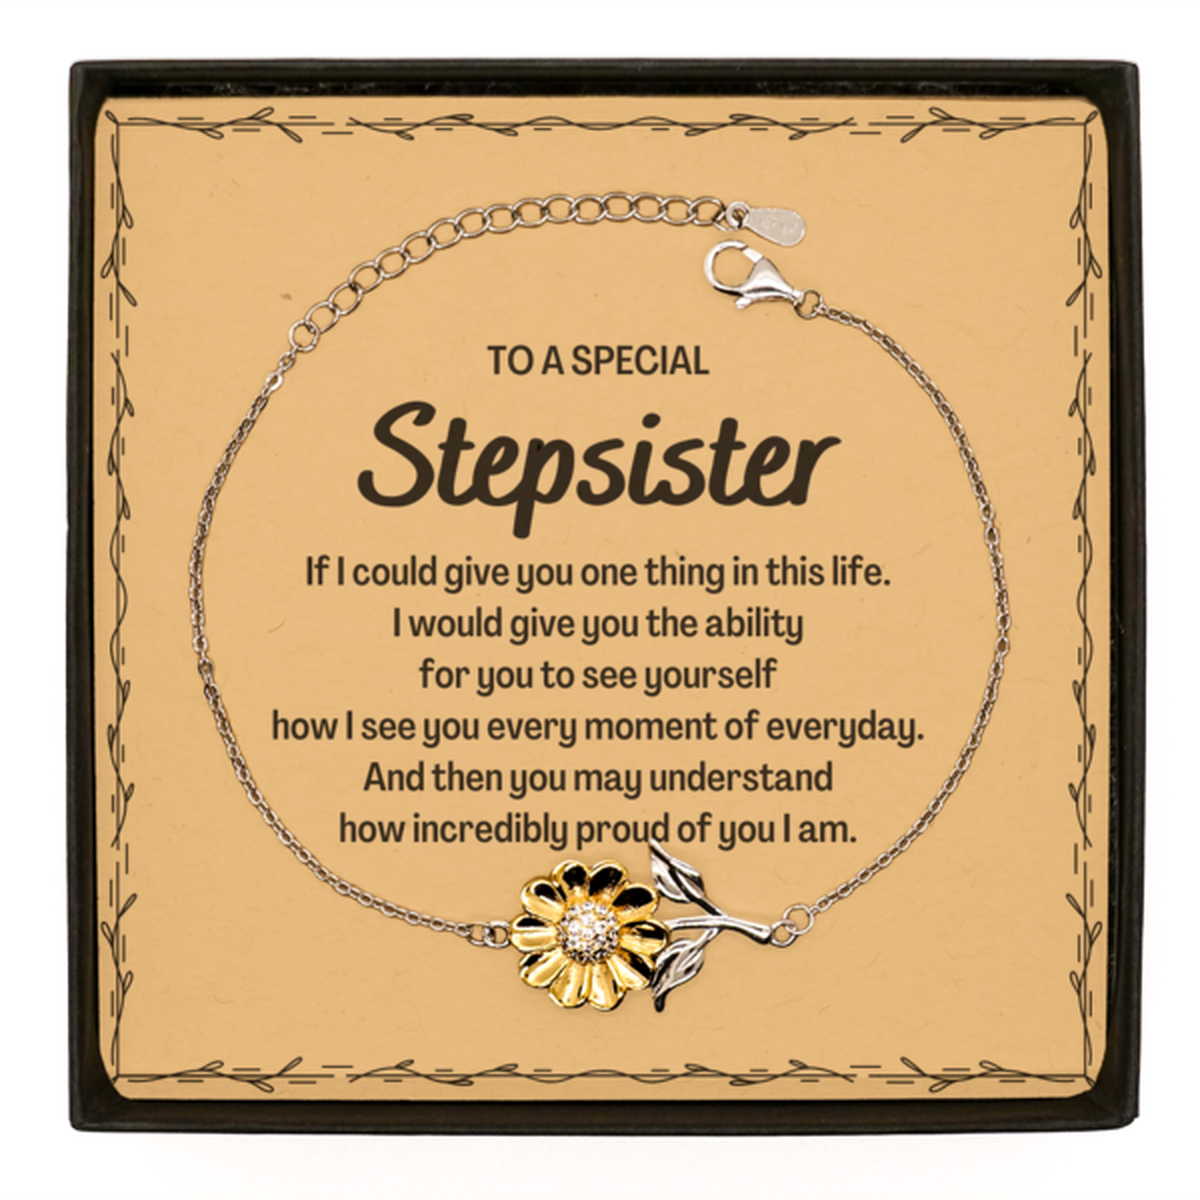 To My Stepsister Sunflower Bracelet, Gifts For Stepsister Message Card, Inspirational Gifts for Christmas Birthday, Epic Gifts for Stepsister To A Special Stepsister how incredibly proud of you I am